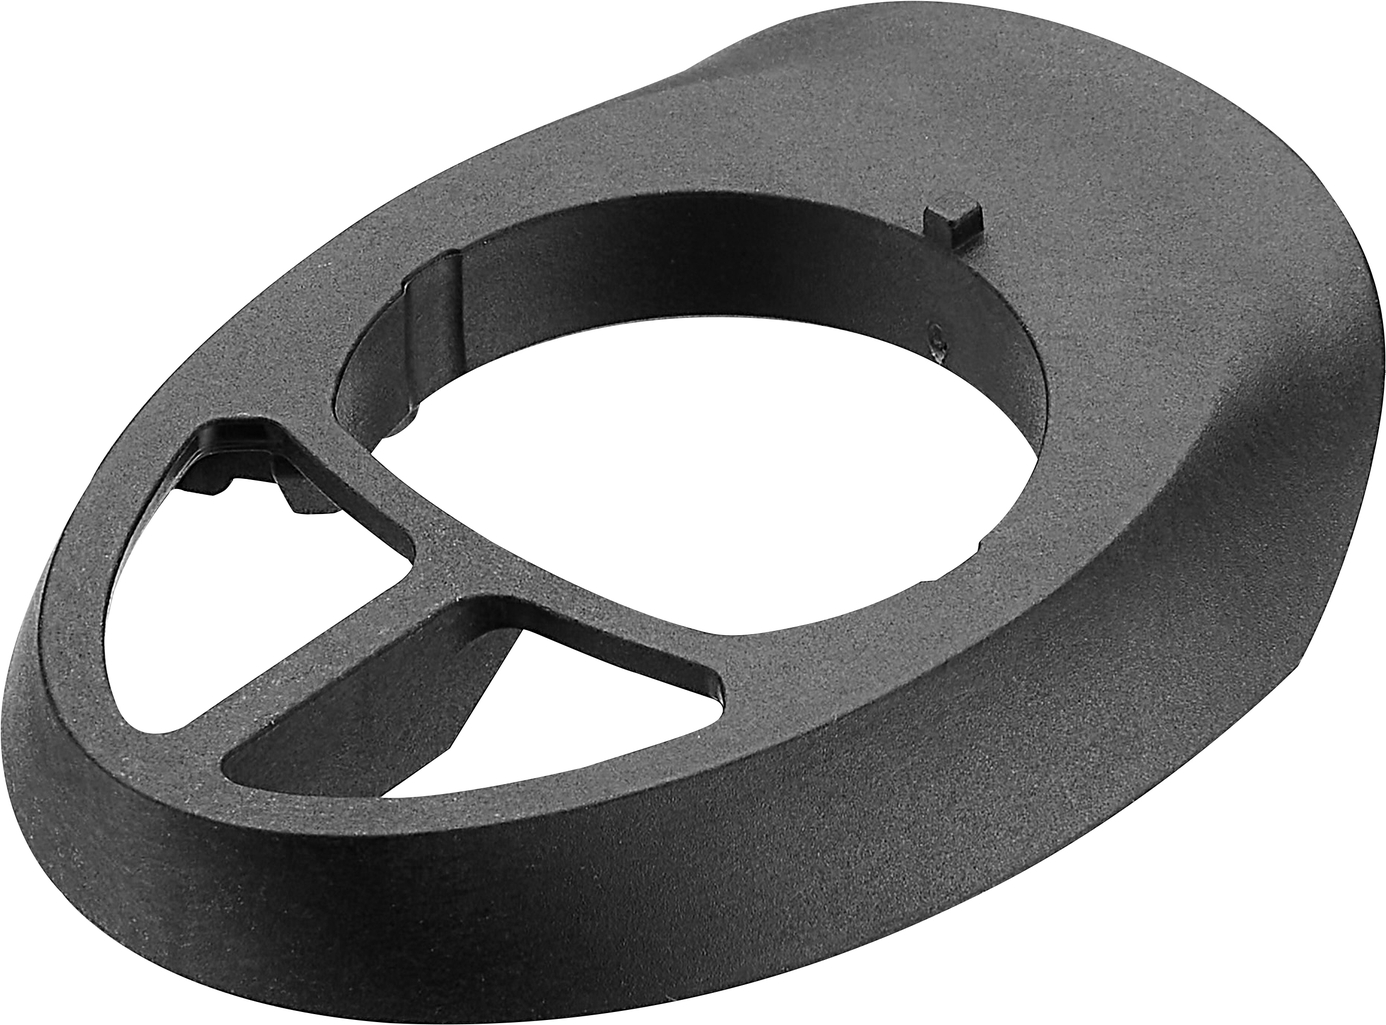 D-Shape Basis Spacer MY23 Propel 